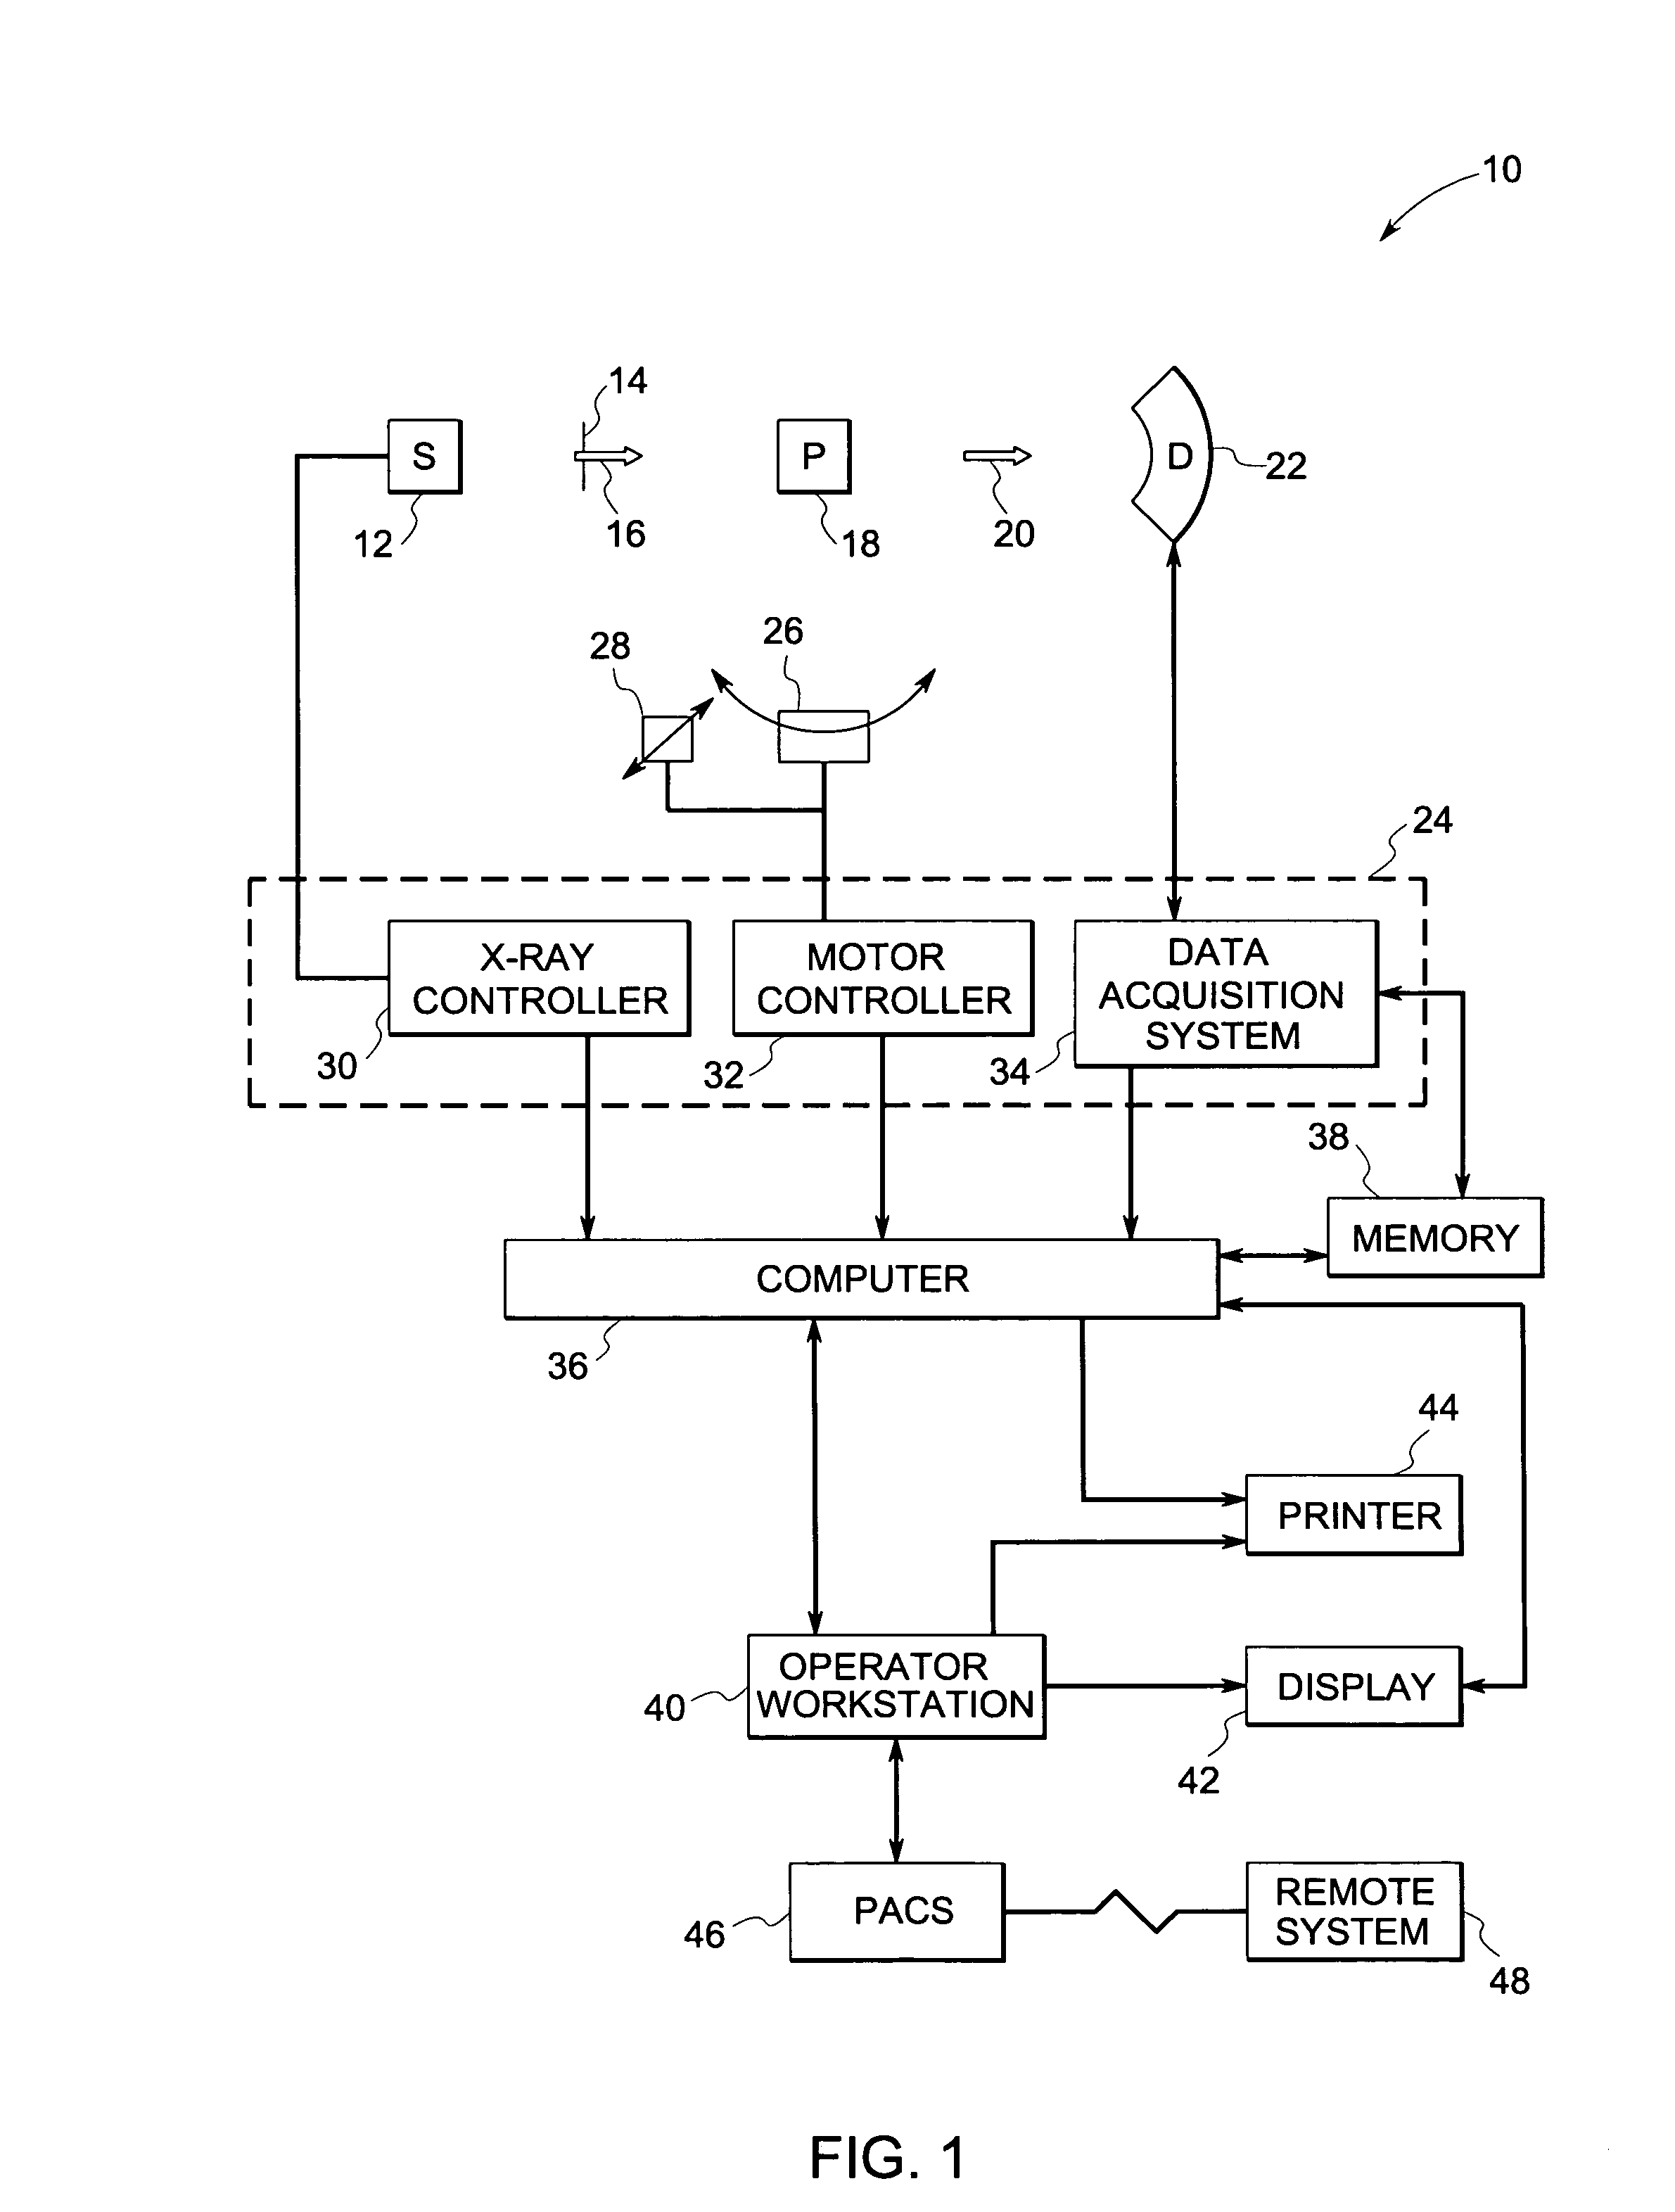 Apparatus and method for hybrid computed tomography imaging